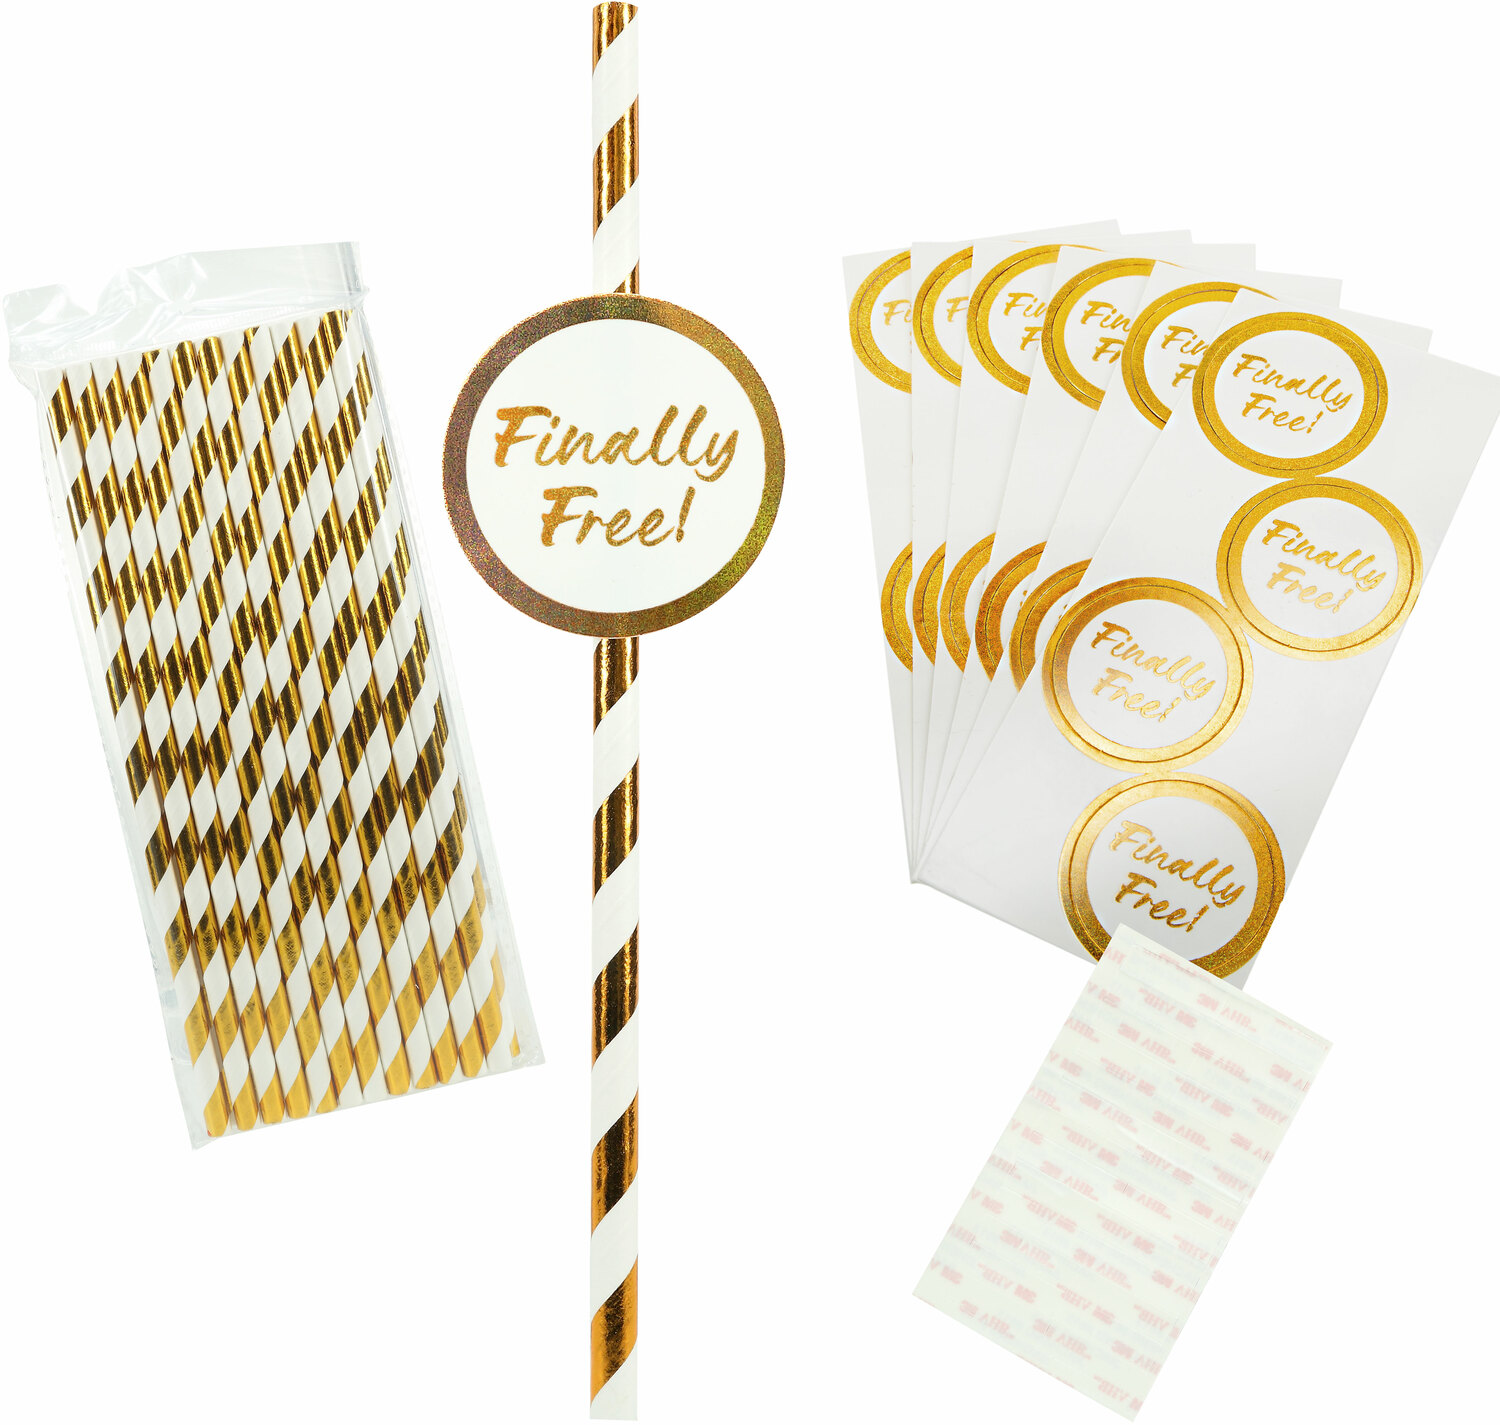 Finally Free by Salty Celebration - Finally Free - 24 Pack Party Straws